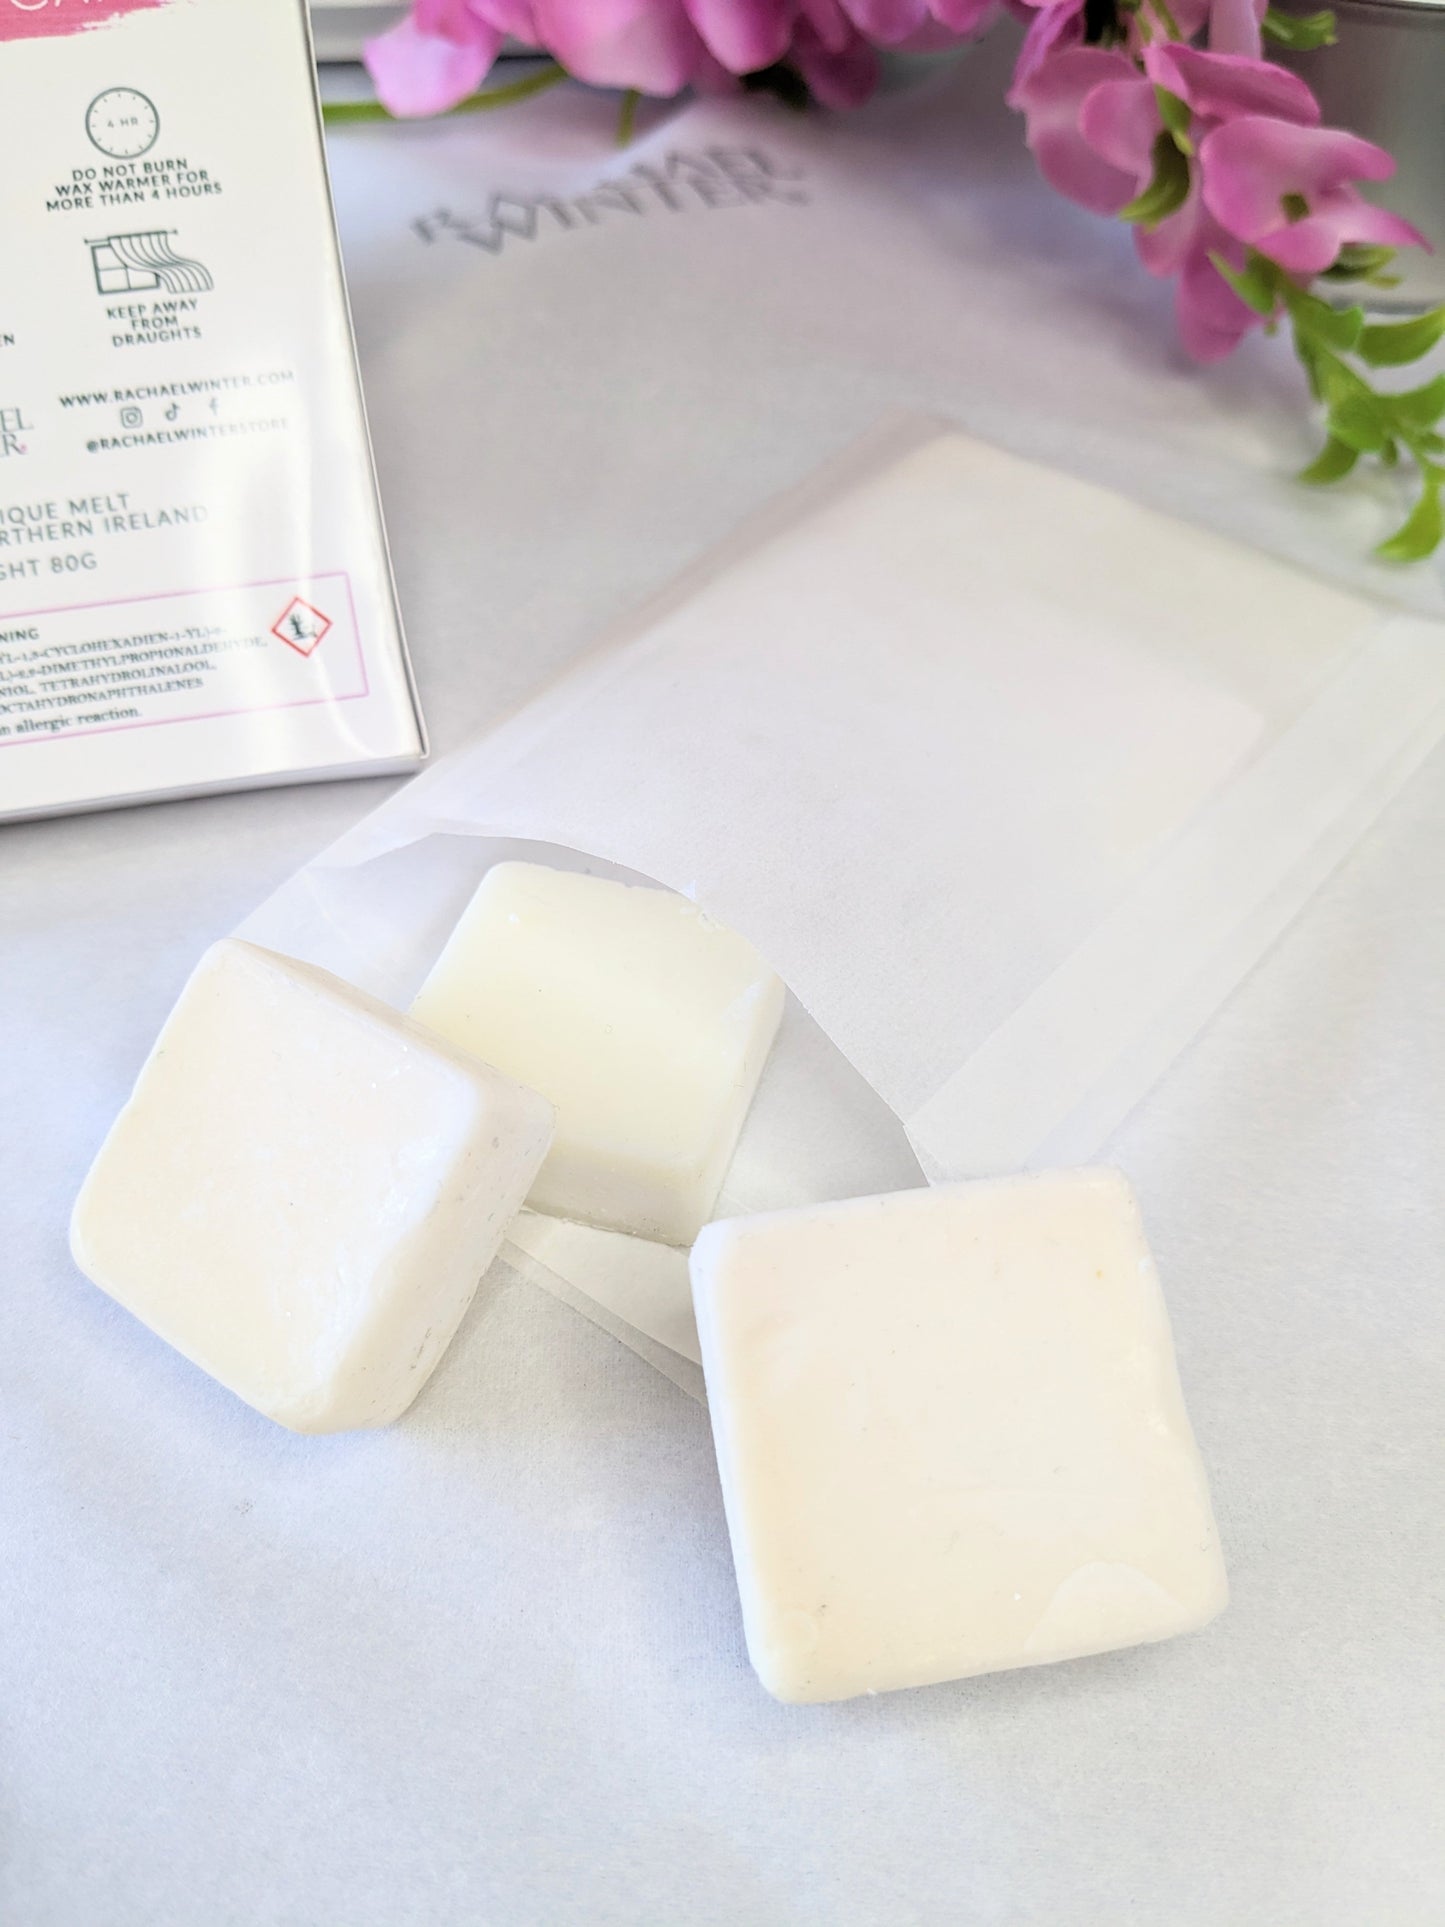 Eco-Soy Wax Handmade Long-Lasting Scent Home Fragrance Electric & Tealight Burners Gift Idea Wax Melt Strong Scented Highly Scented Plastic Free Eco Candles Wax Tarts Snap Bars